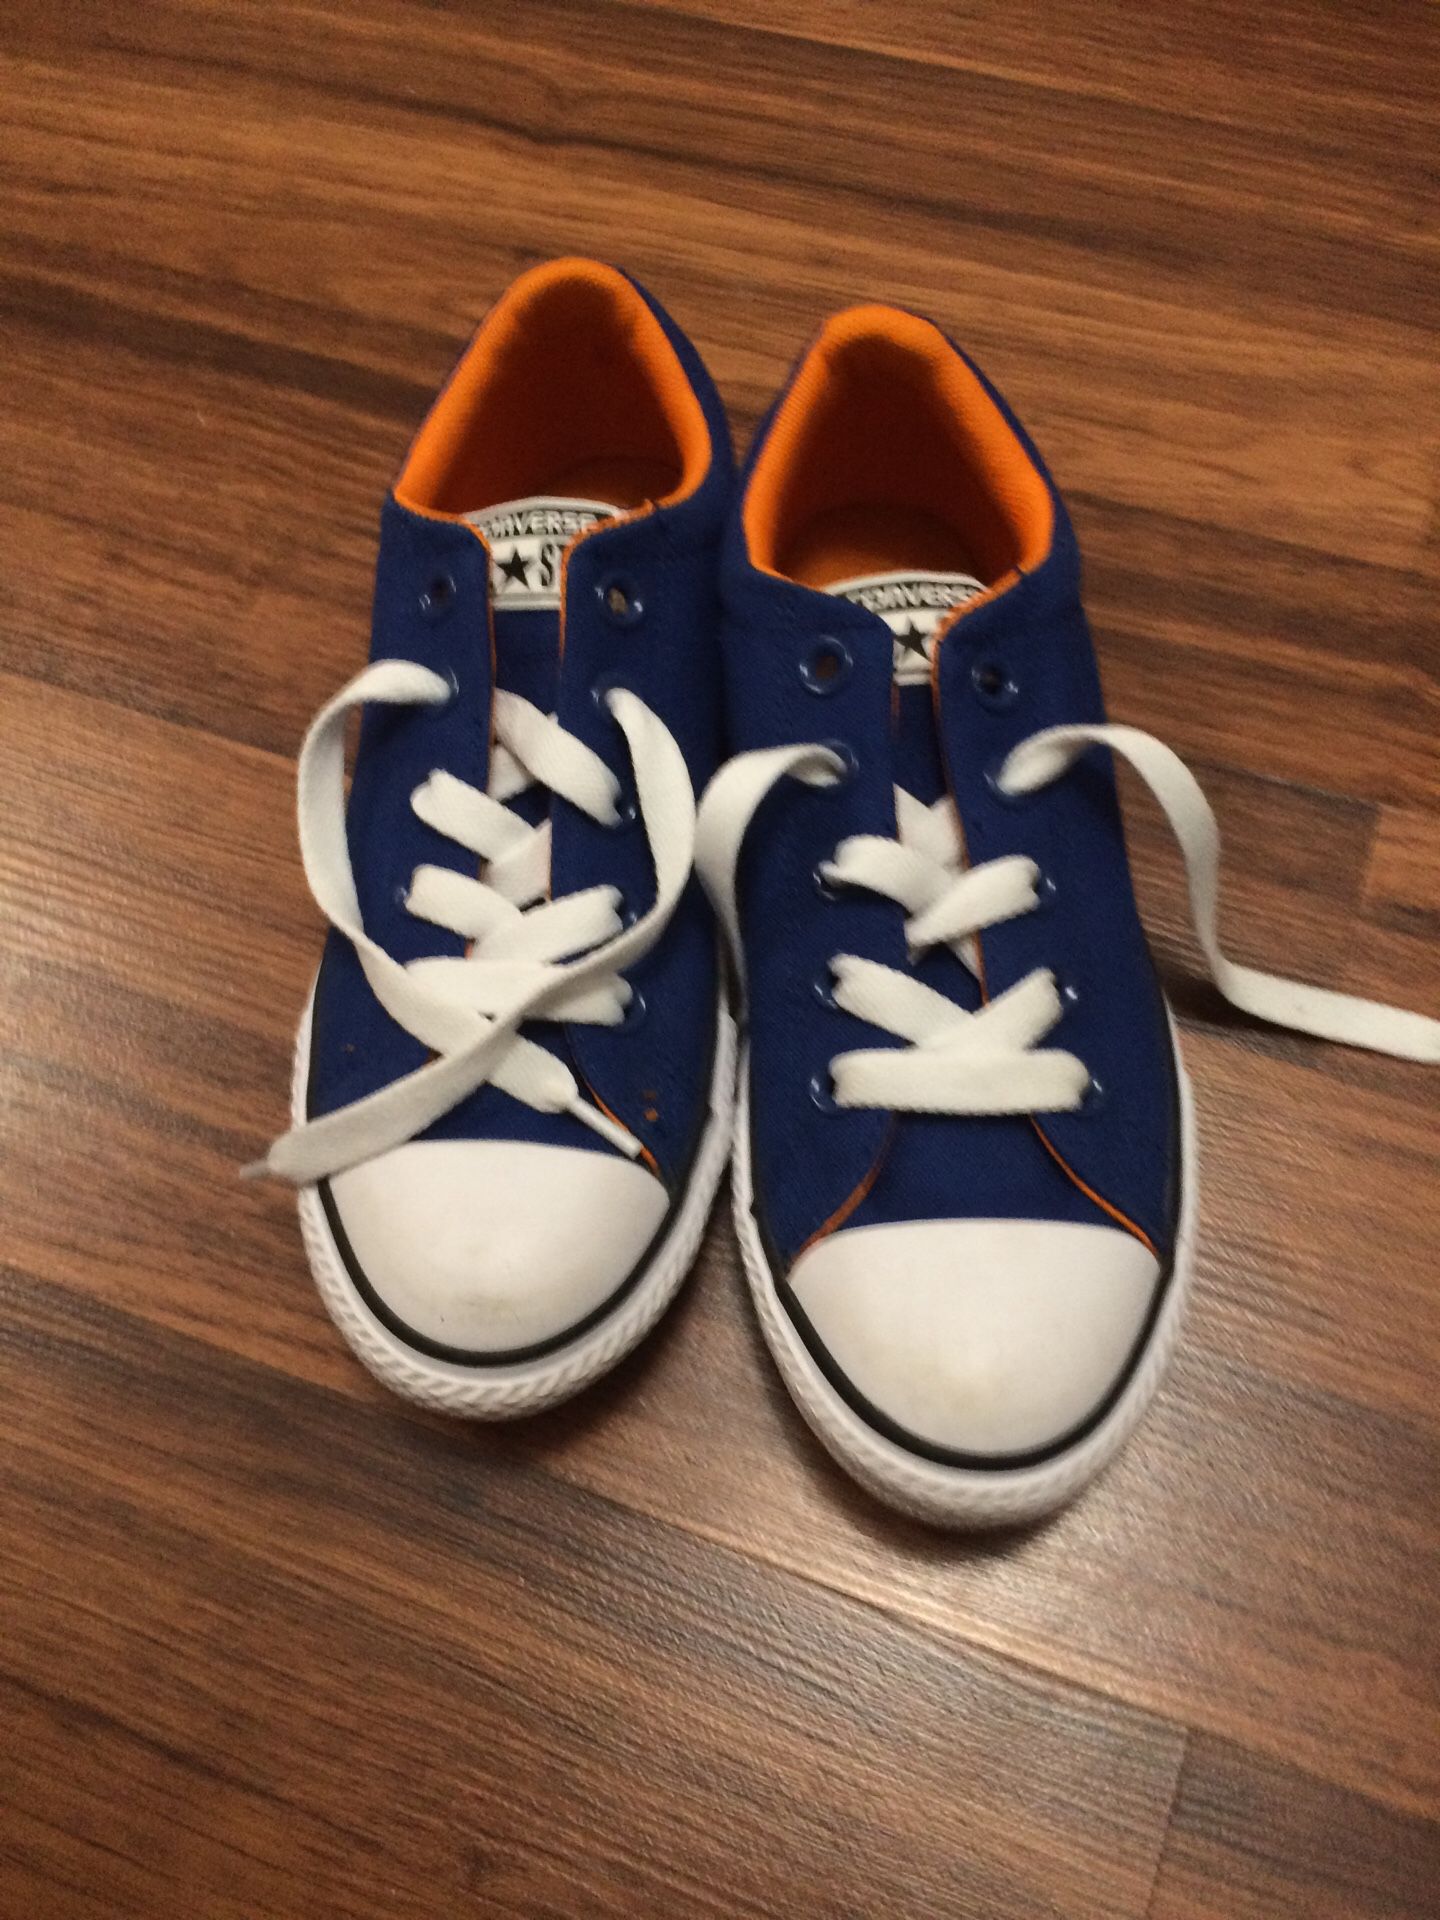 Brand new without tags size 2 converse boys